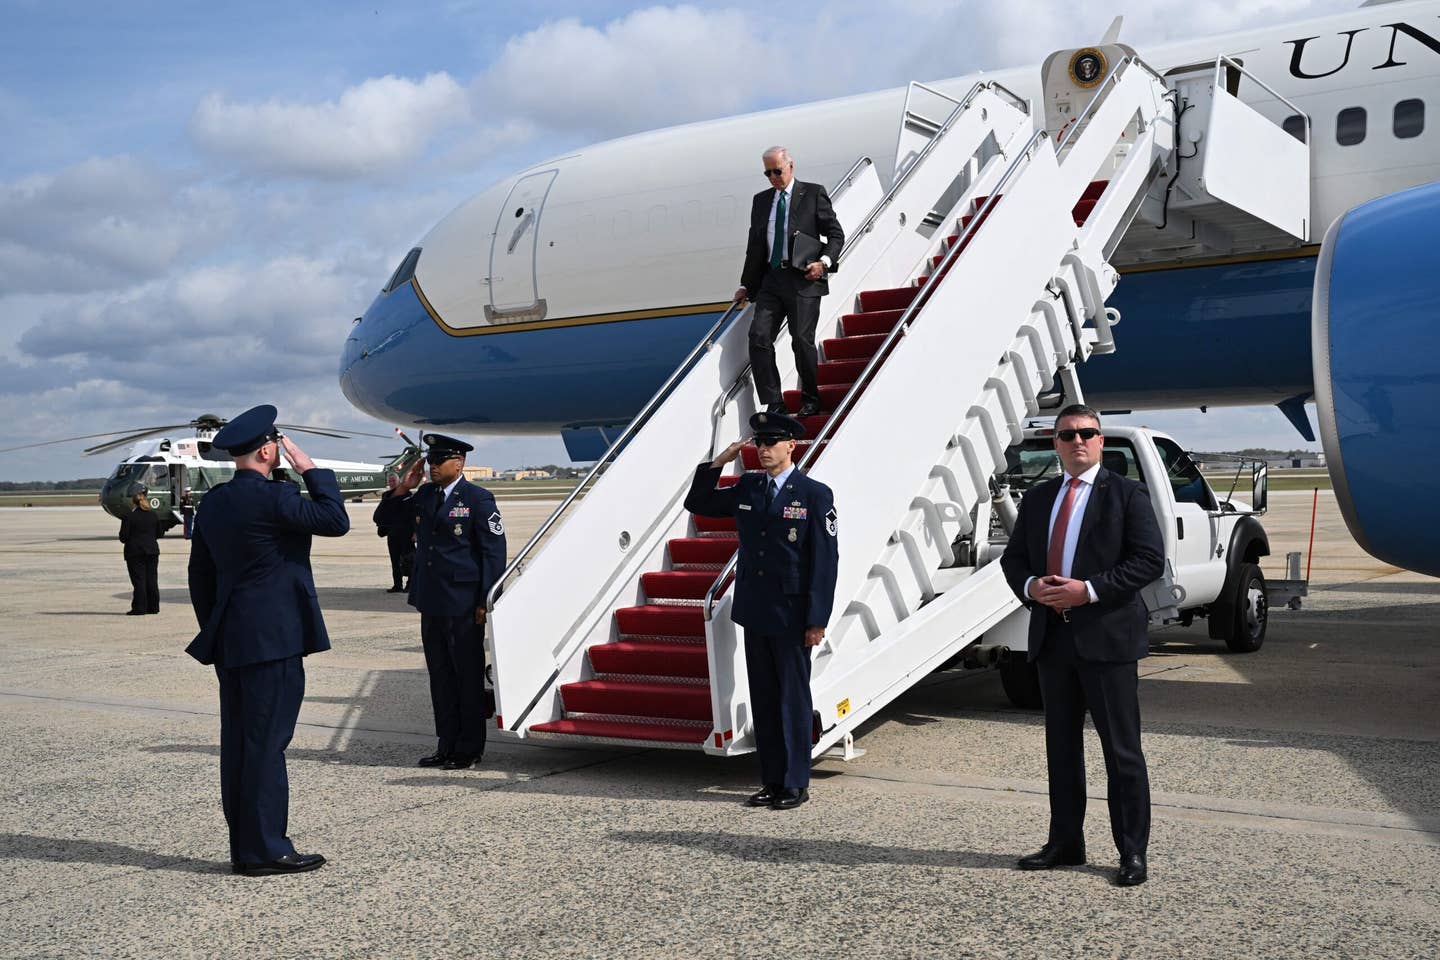 US President Joe Biden disembarks Air Force One at Joint Base Andrews in Maryland on October 17, 2022, following his trip to California. <em>Photo by SAUL LOEB/AFP via Getty Images</em>